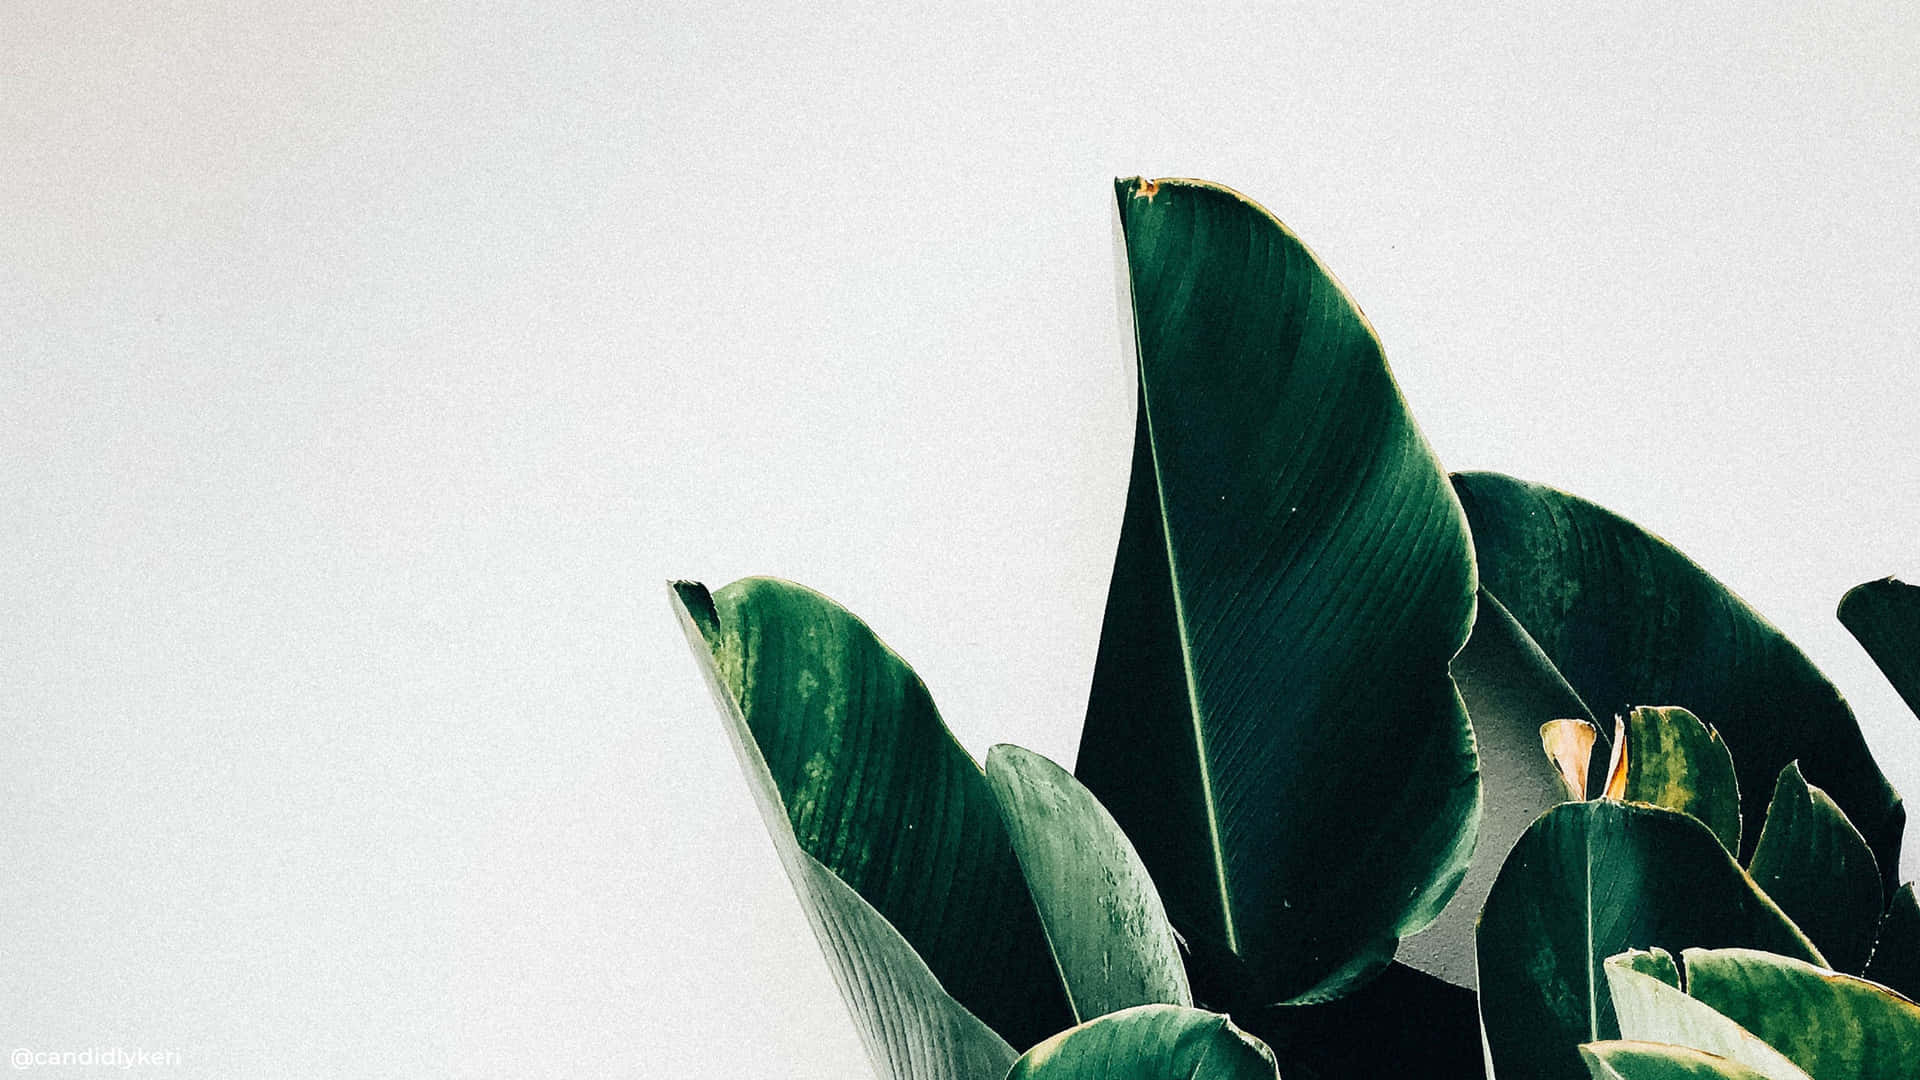 Enhance your workspace with this minimalist and modern Plant Aesthetic Laptop Wallpaper